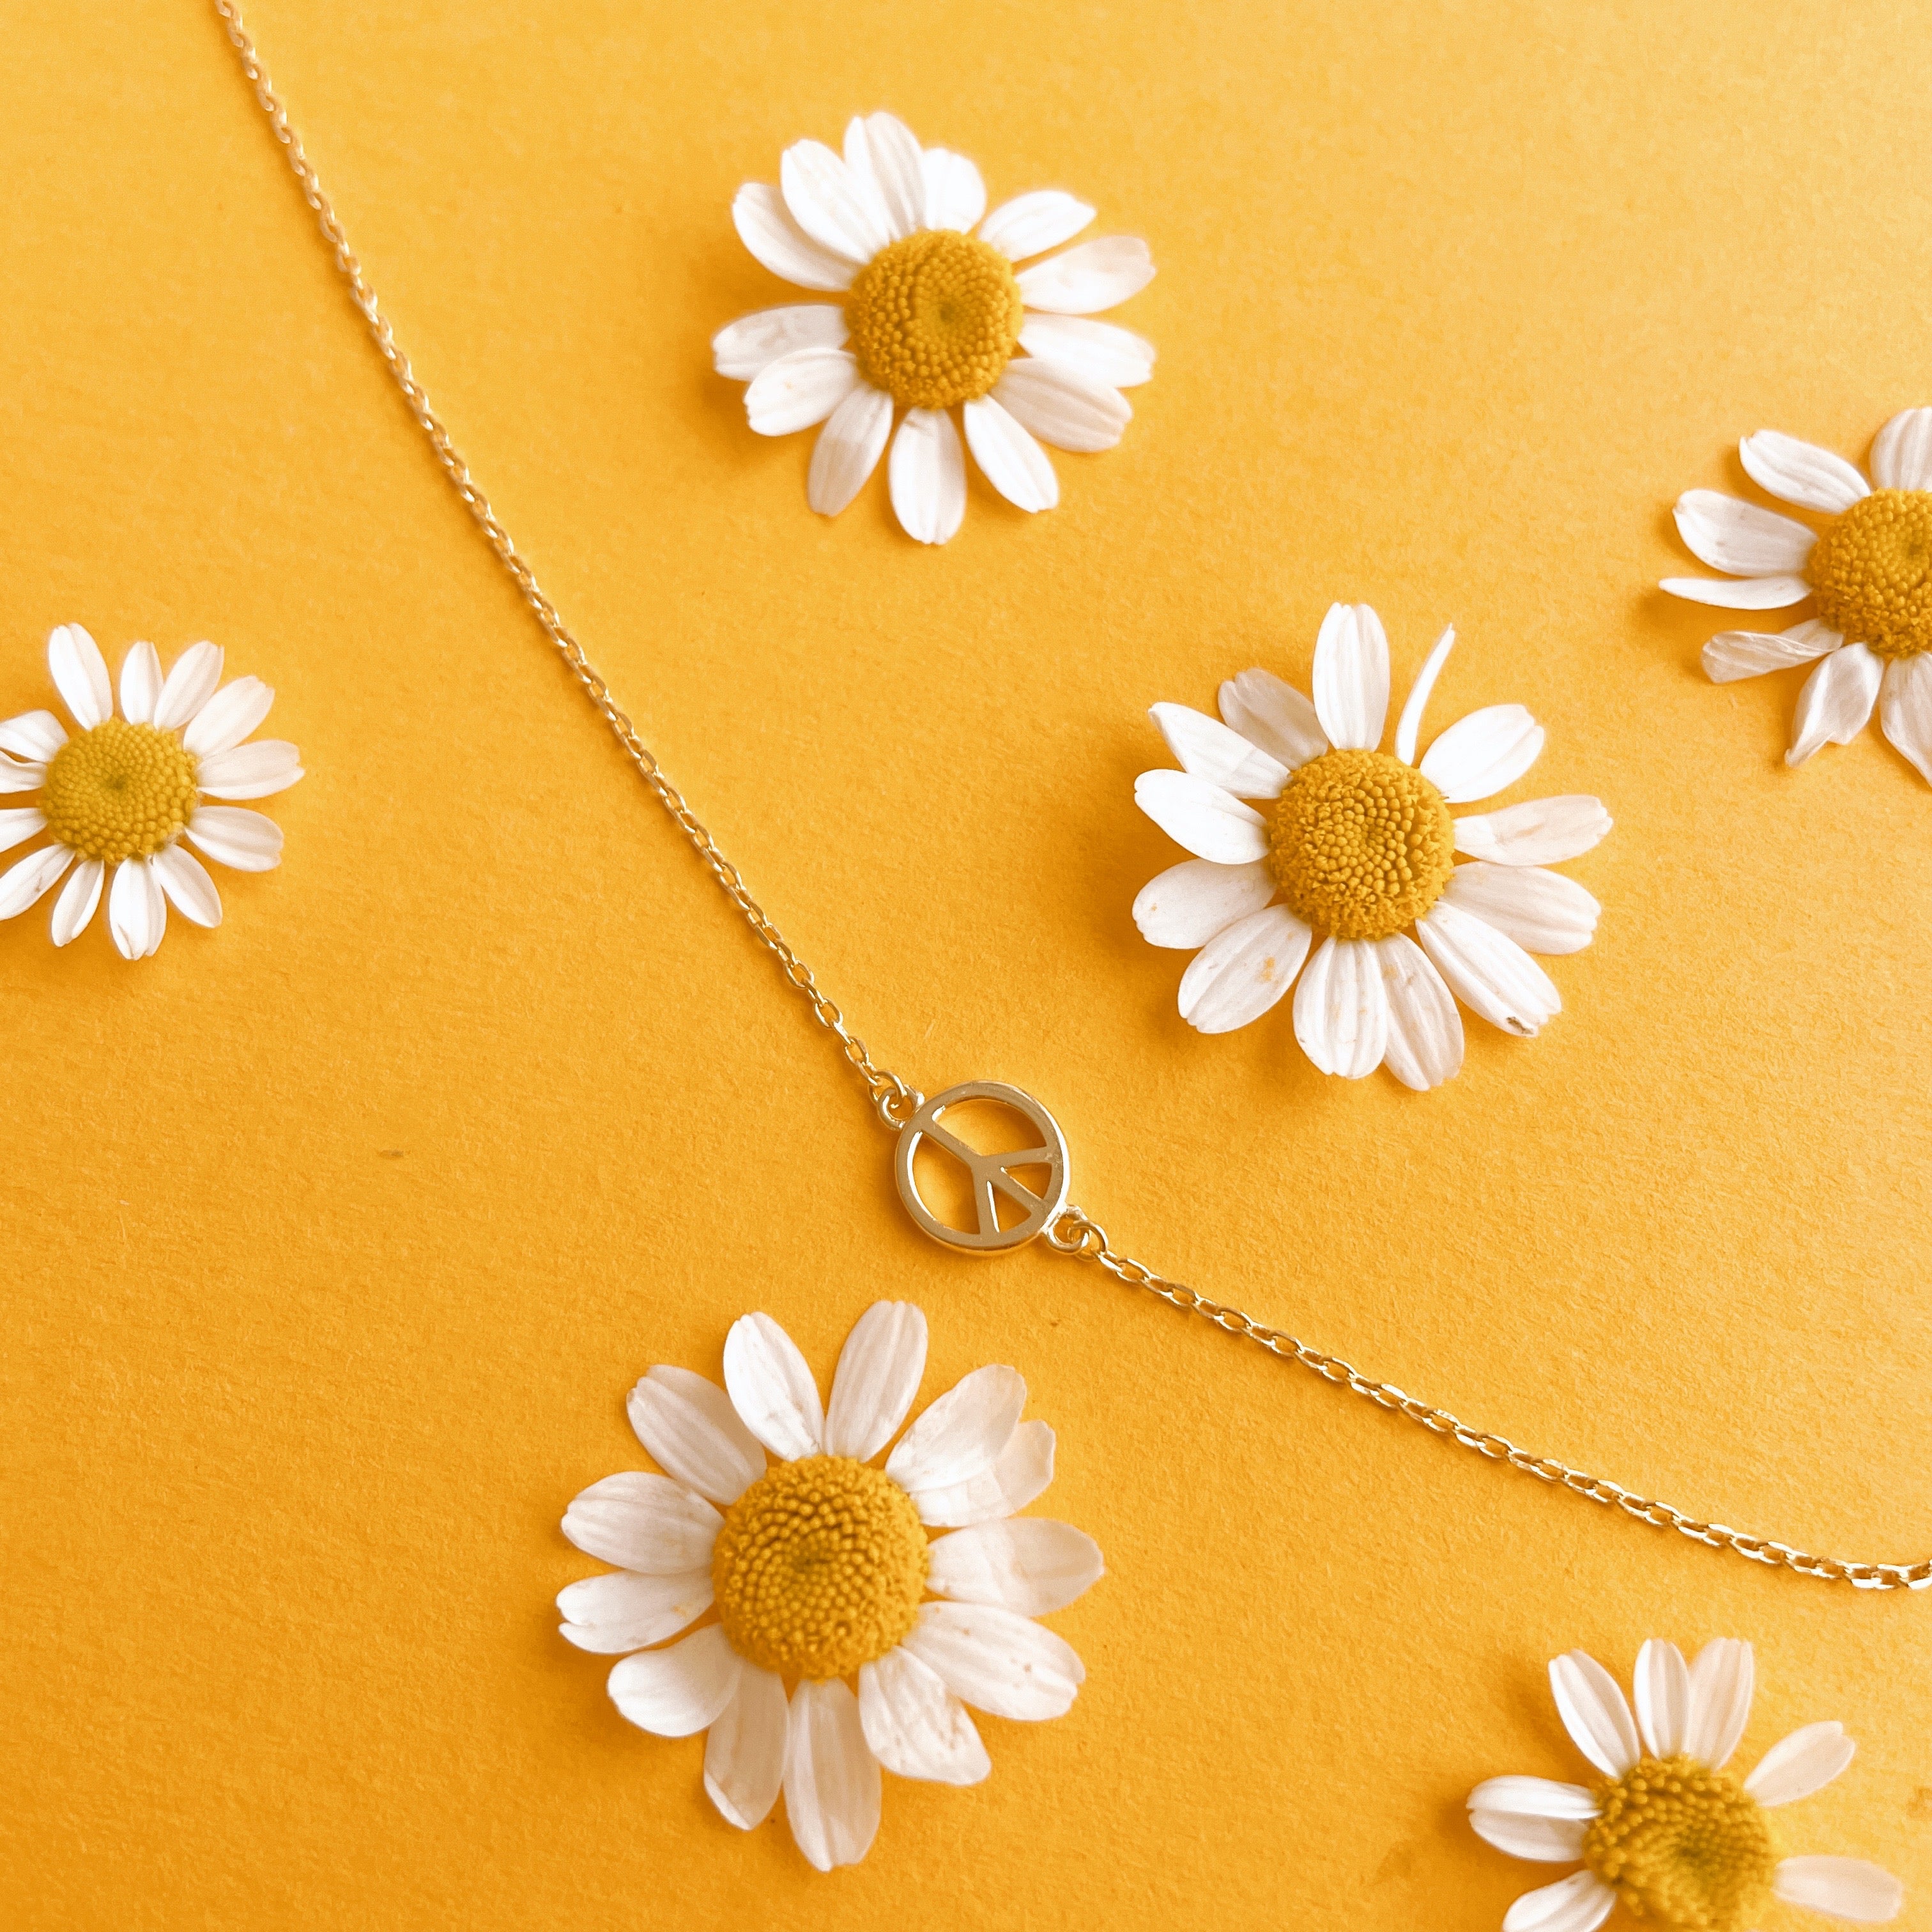 Gold chain necklace complete with classic peace sign symbol pendant. The pendent is connected to the chain by two loops on each side.   In this image the necklace is draped on a bright yellow paper with daisies sprinkled around it like confetti.